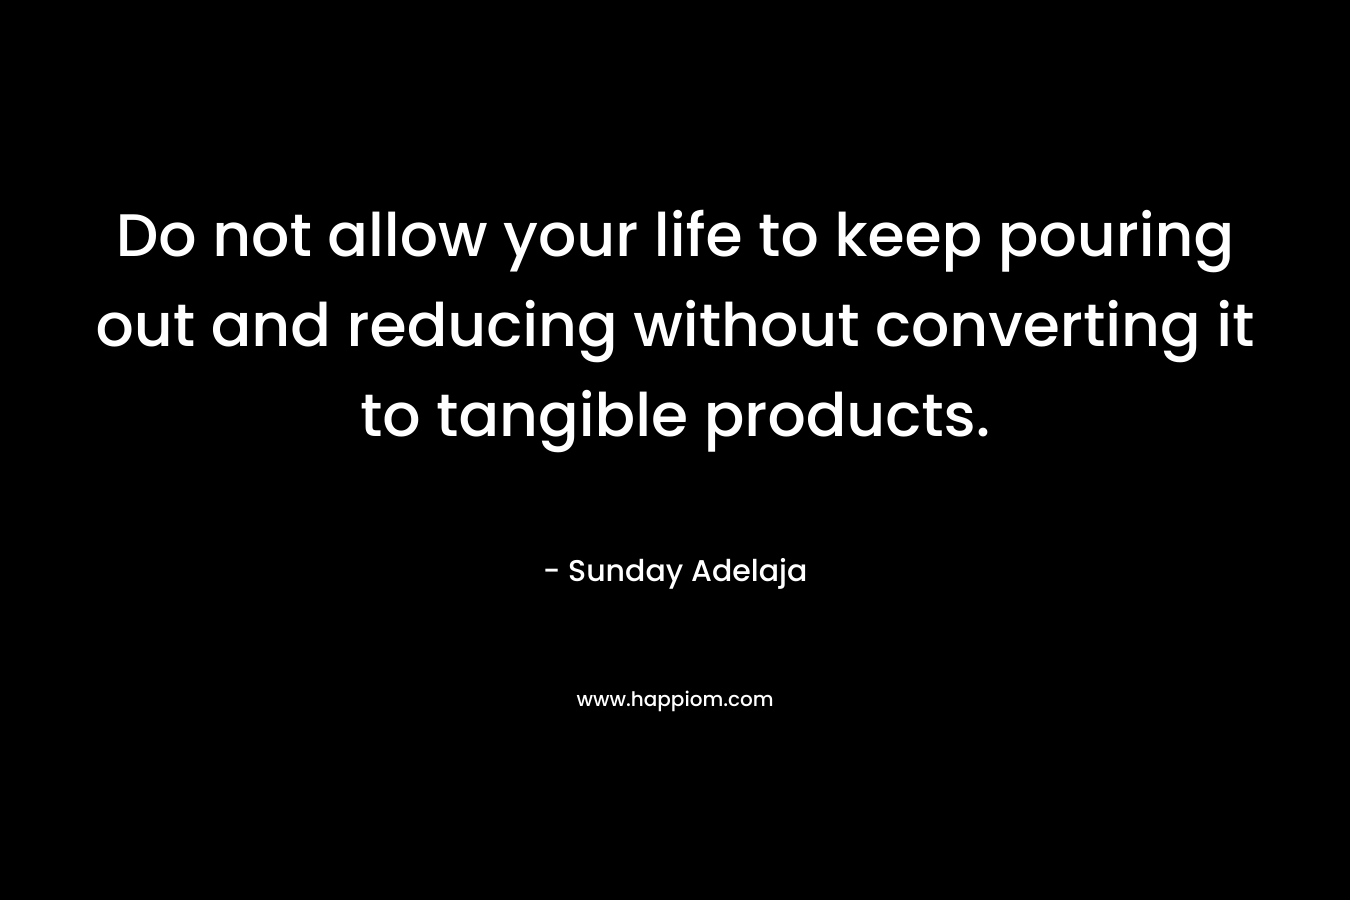 Do not allow your life to keep pouring out and reducing without converting it to tangible products.